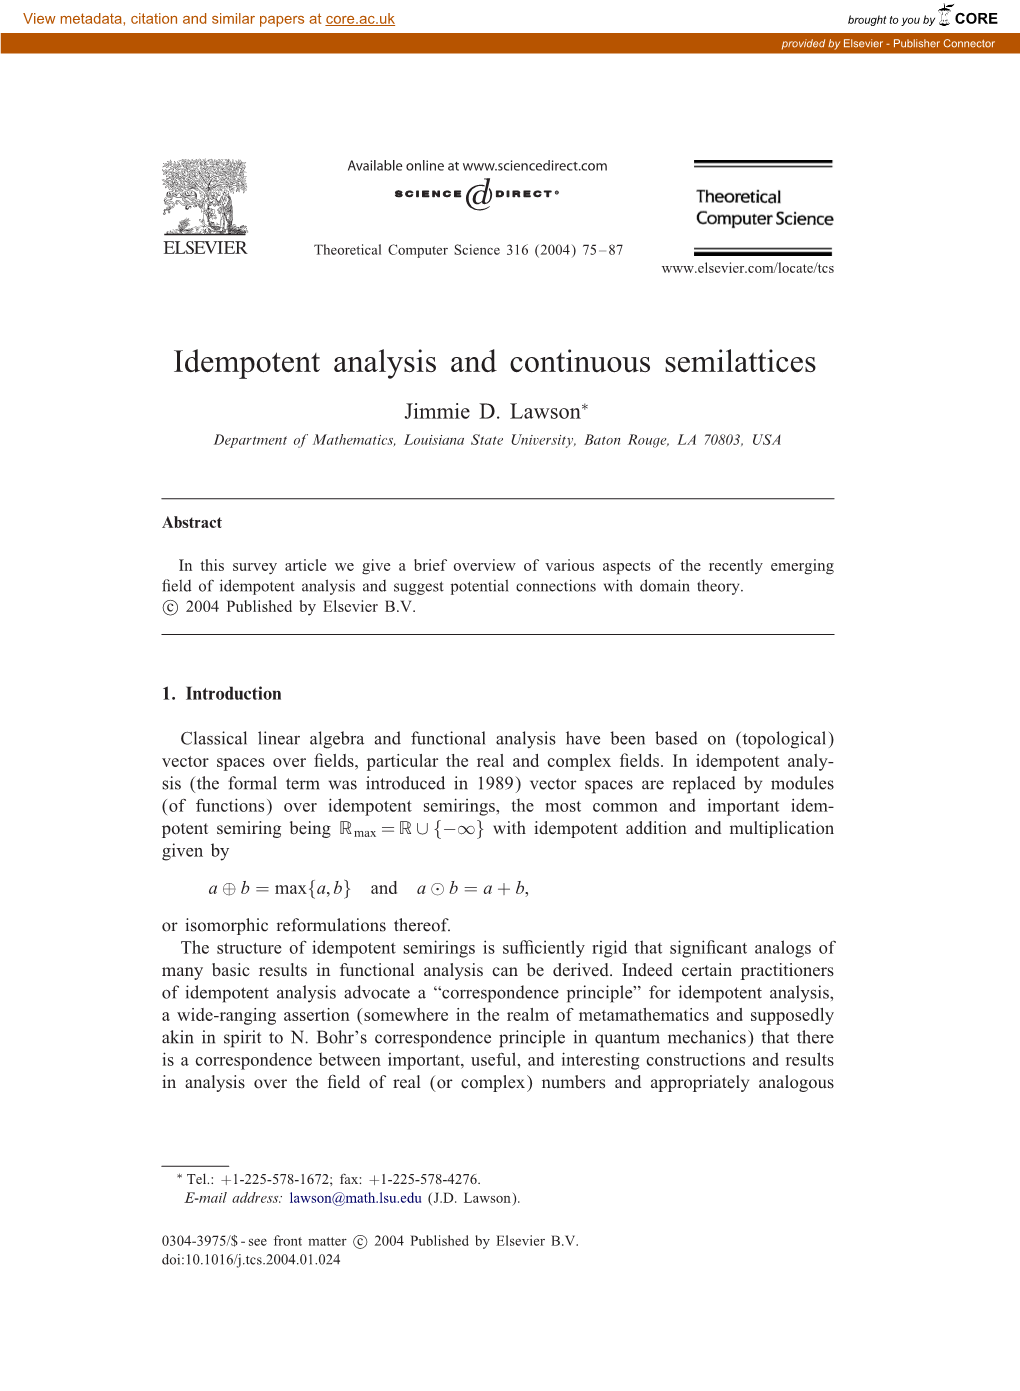 Idempotent Analysis and Continuous Semilattices